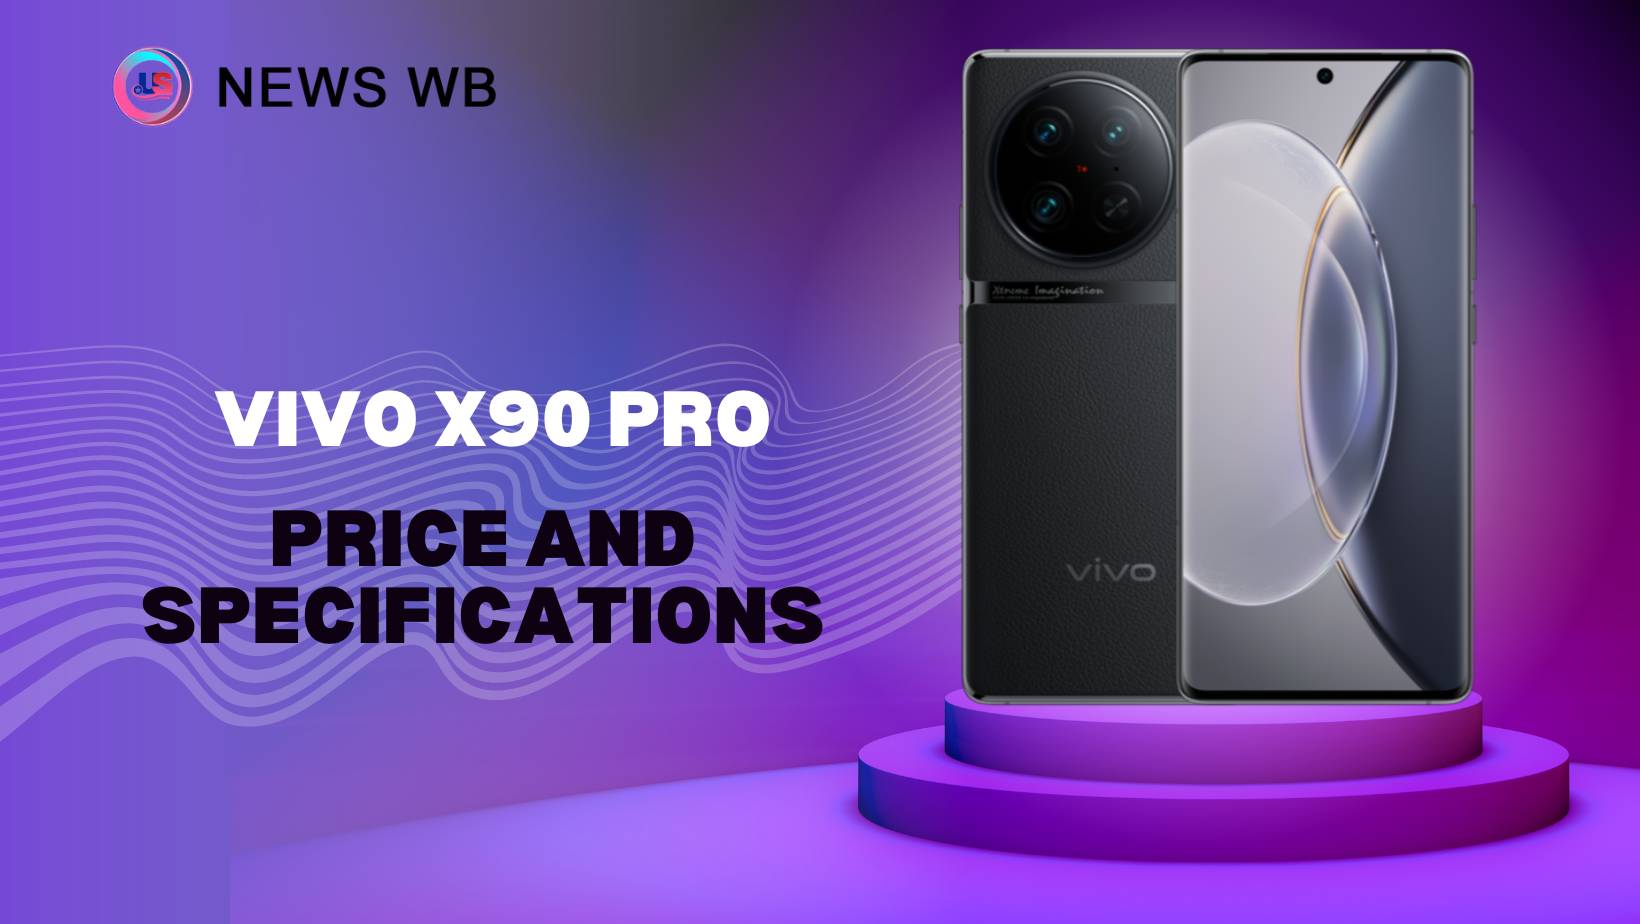 Vivo X90 Pro Price and Specifications